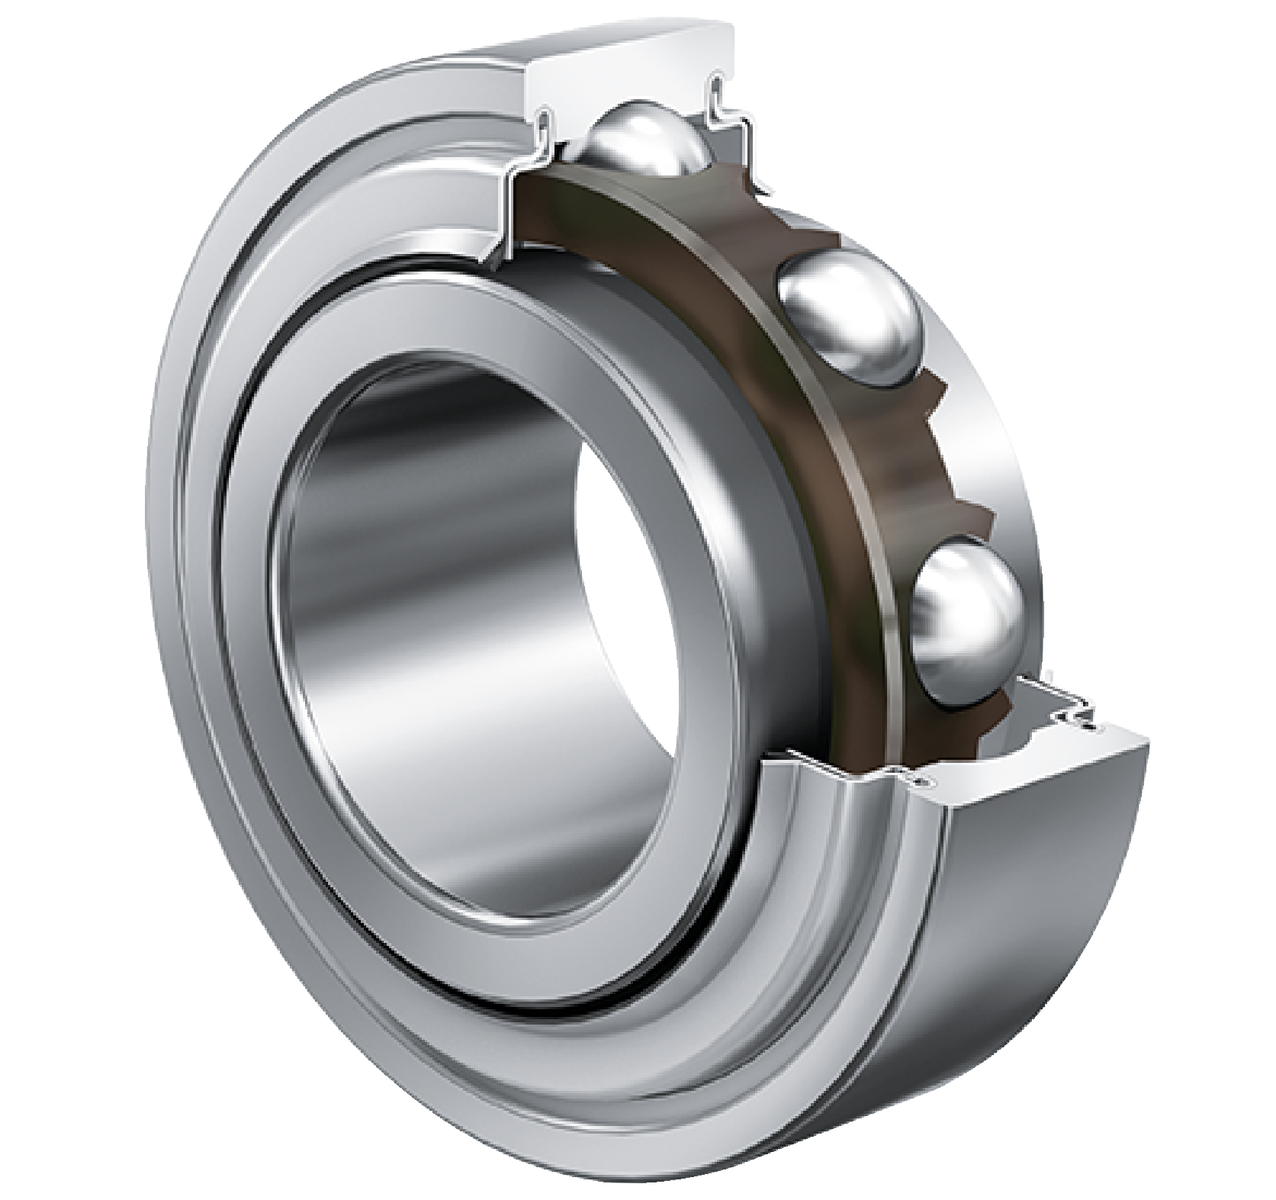 Radial Insert Ball Bearing 2..-KRR, Cylindrical Outer Ring, Inner Ring for Fit, R Seals on Both Sides